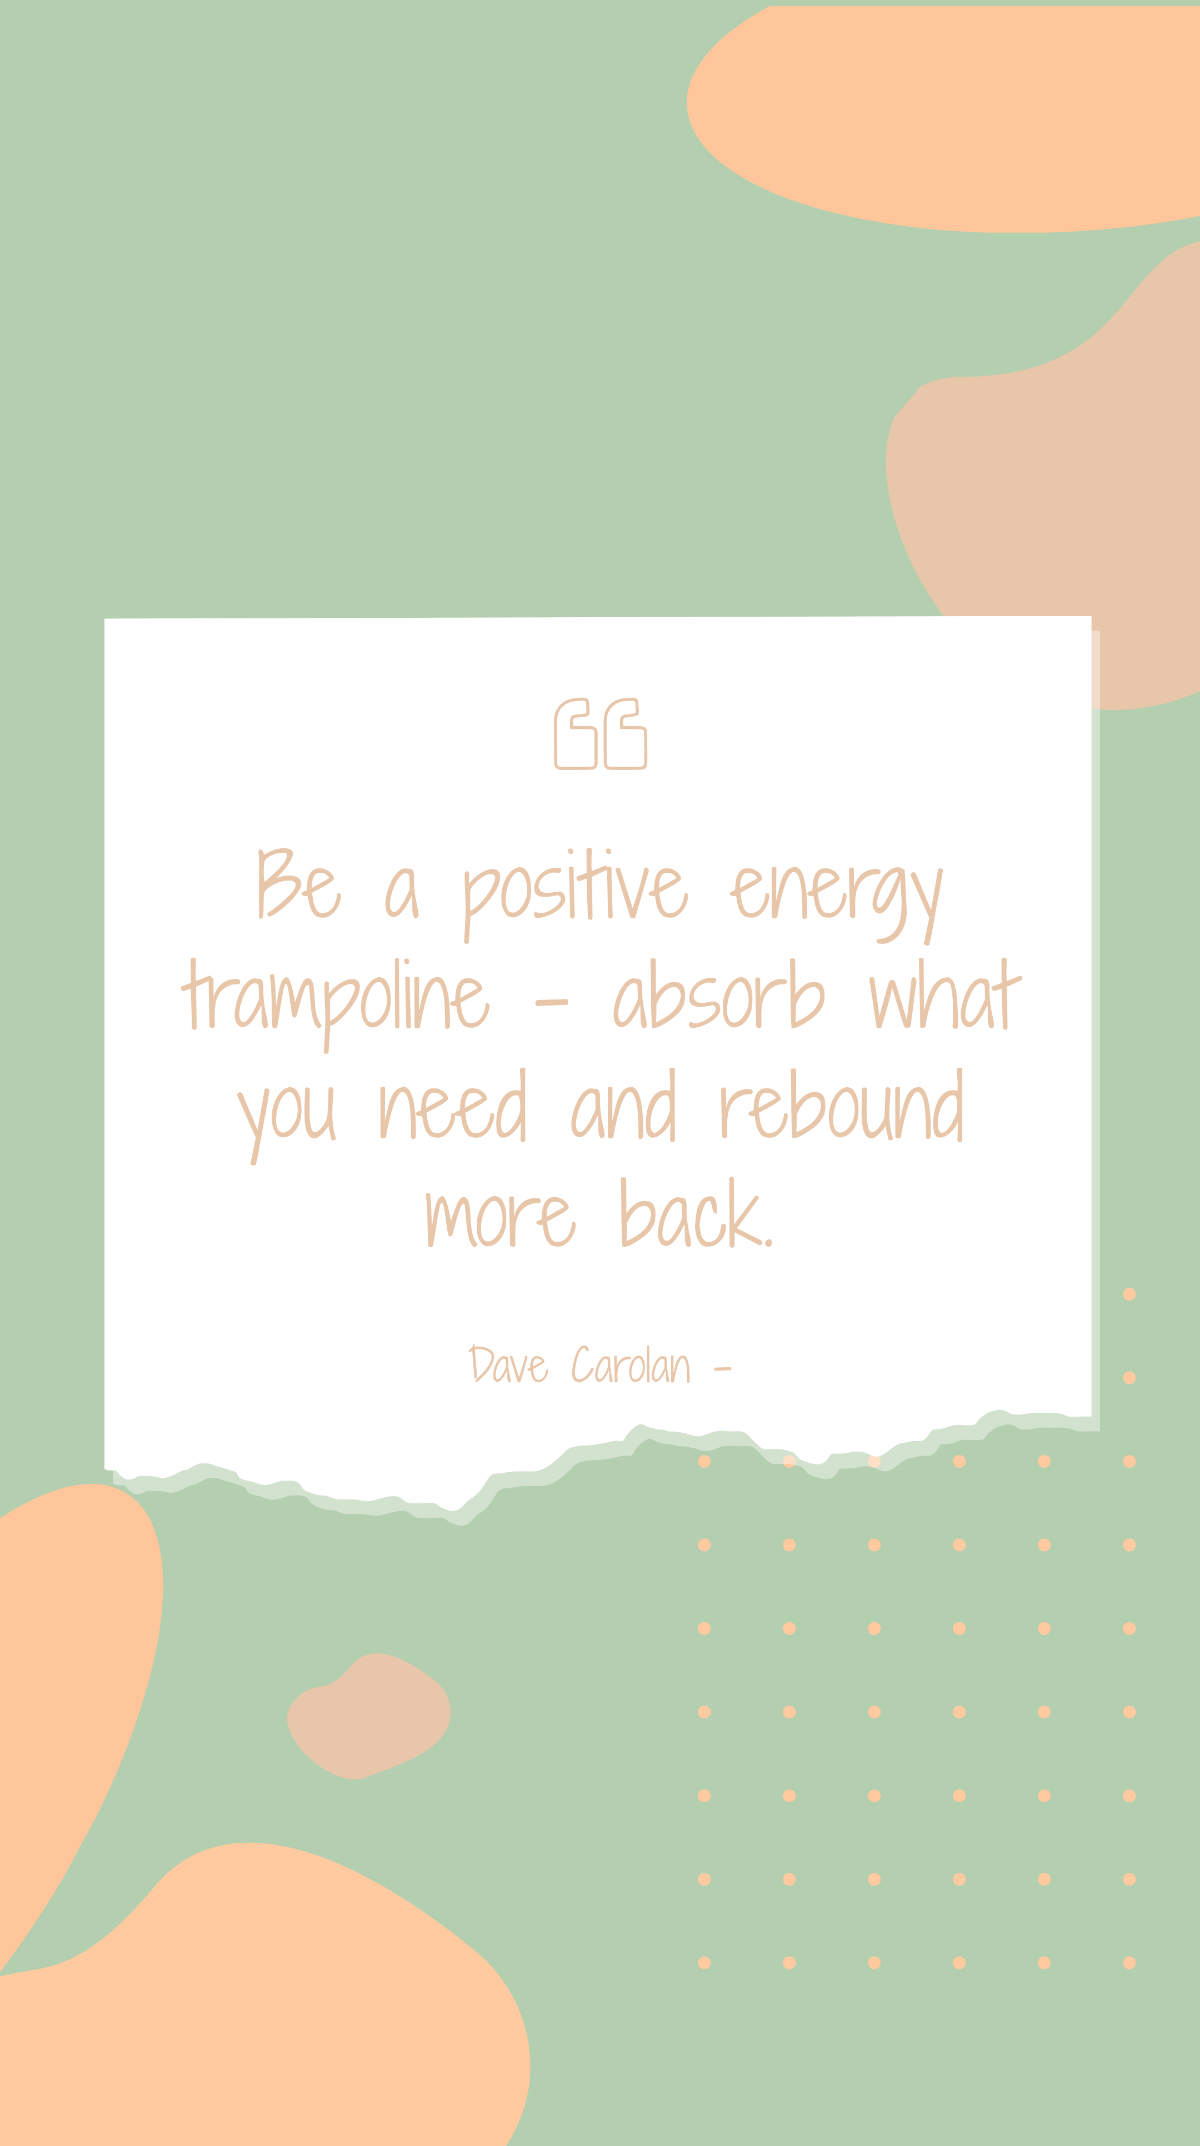 Dave Carolan - Be a positive energy trampoline – absorb what you need and rebound more back. Template